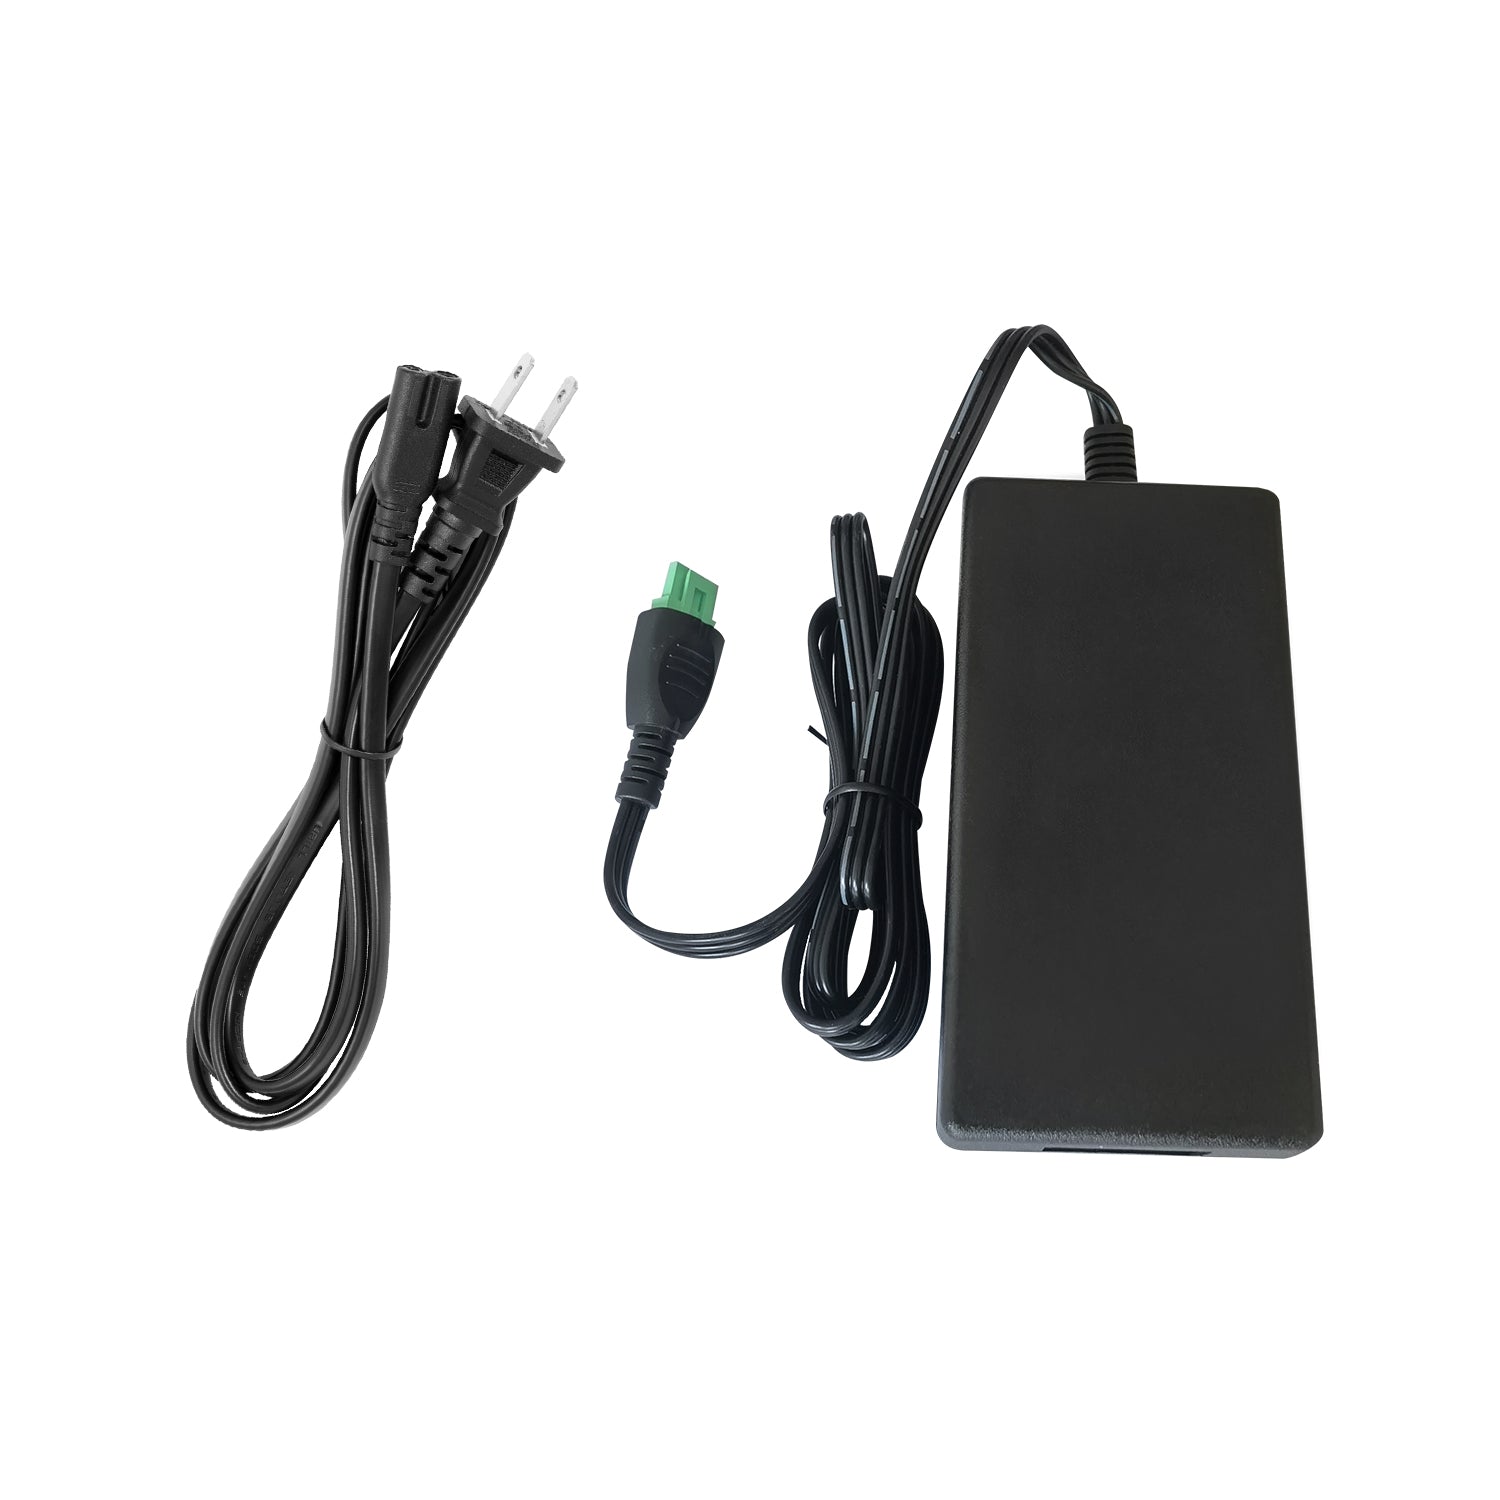 AC Adapter for HP Officejet 7610 All-in-One Printer.